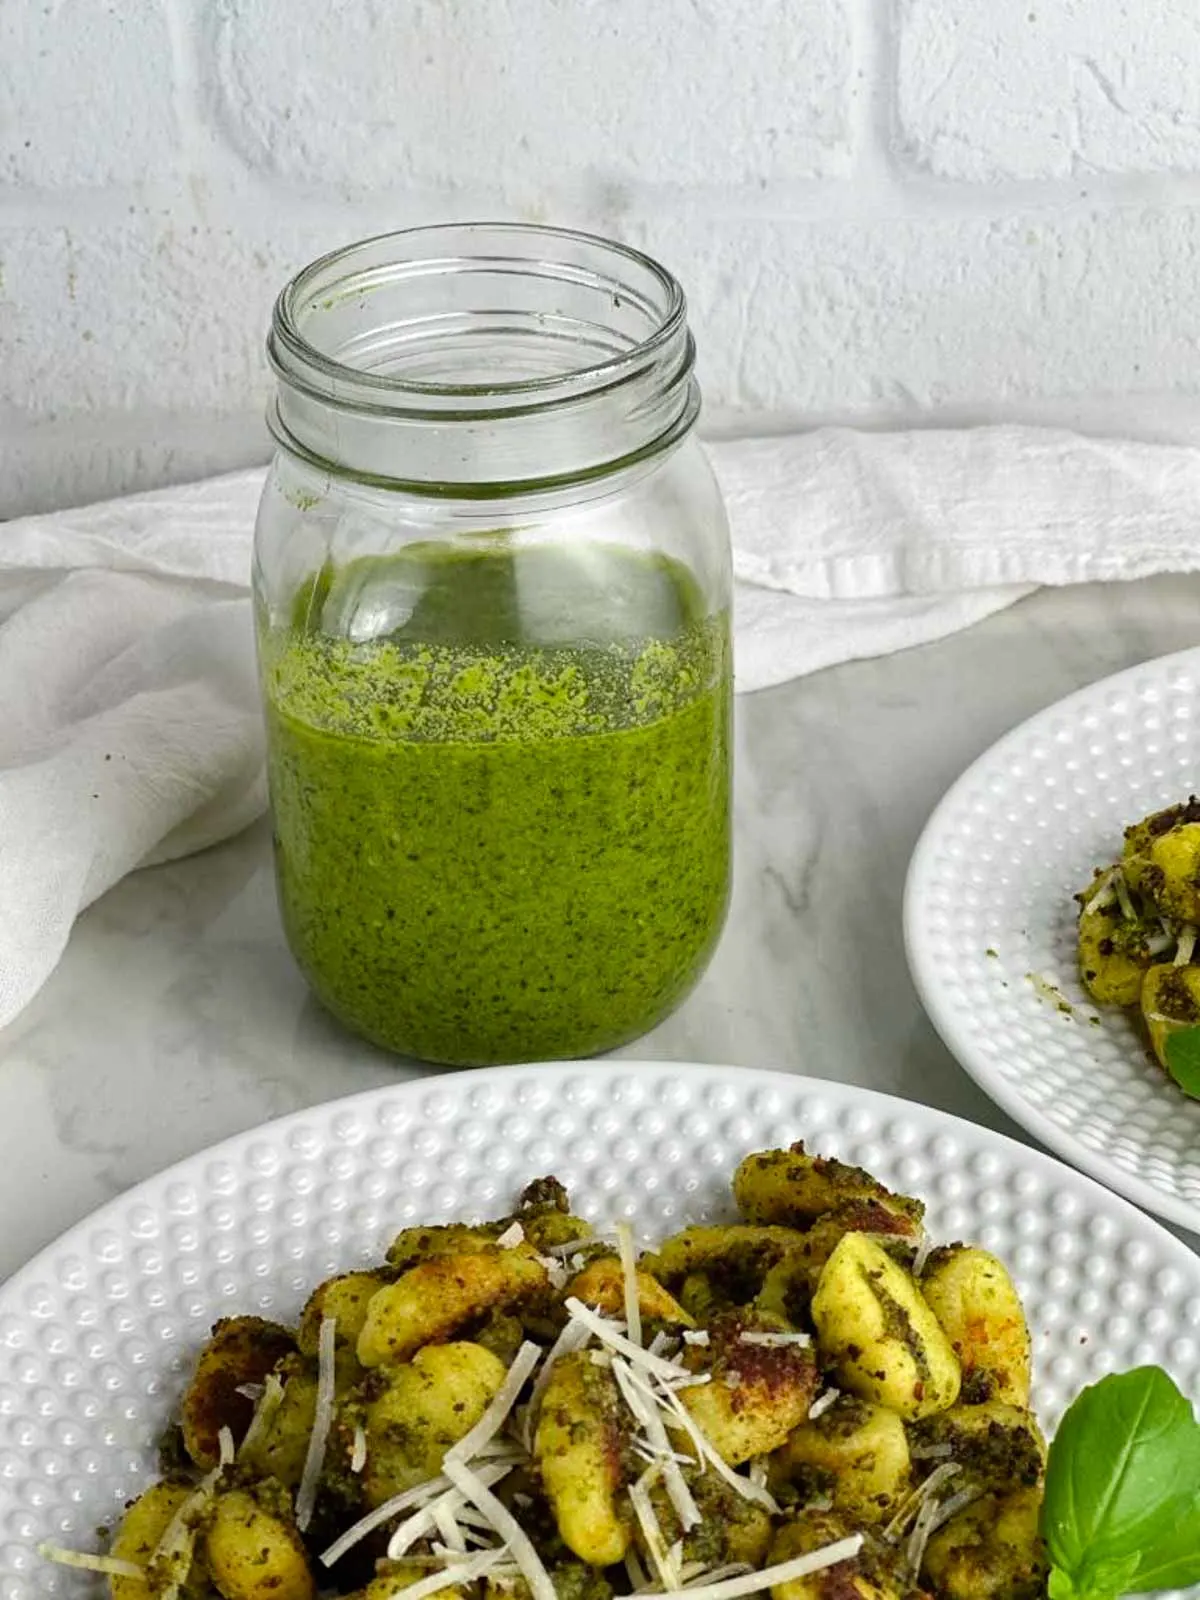 Basil pesto sauce with walnuts is a delicious addition to gnocchi.